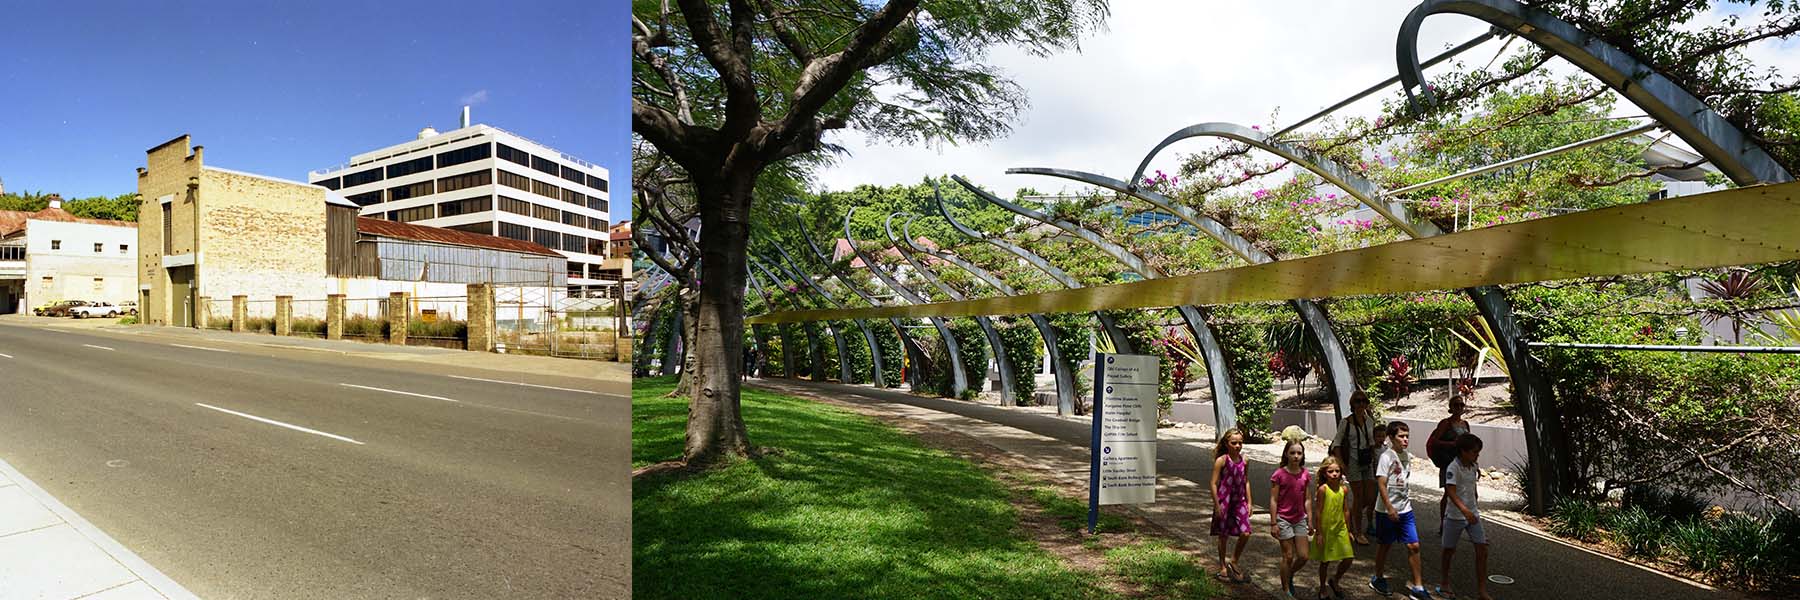 View towards City Electric Light Company and Brisbane City Council Sub Station, 1985 and 2015